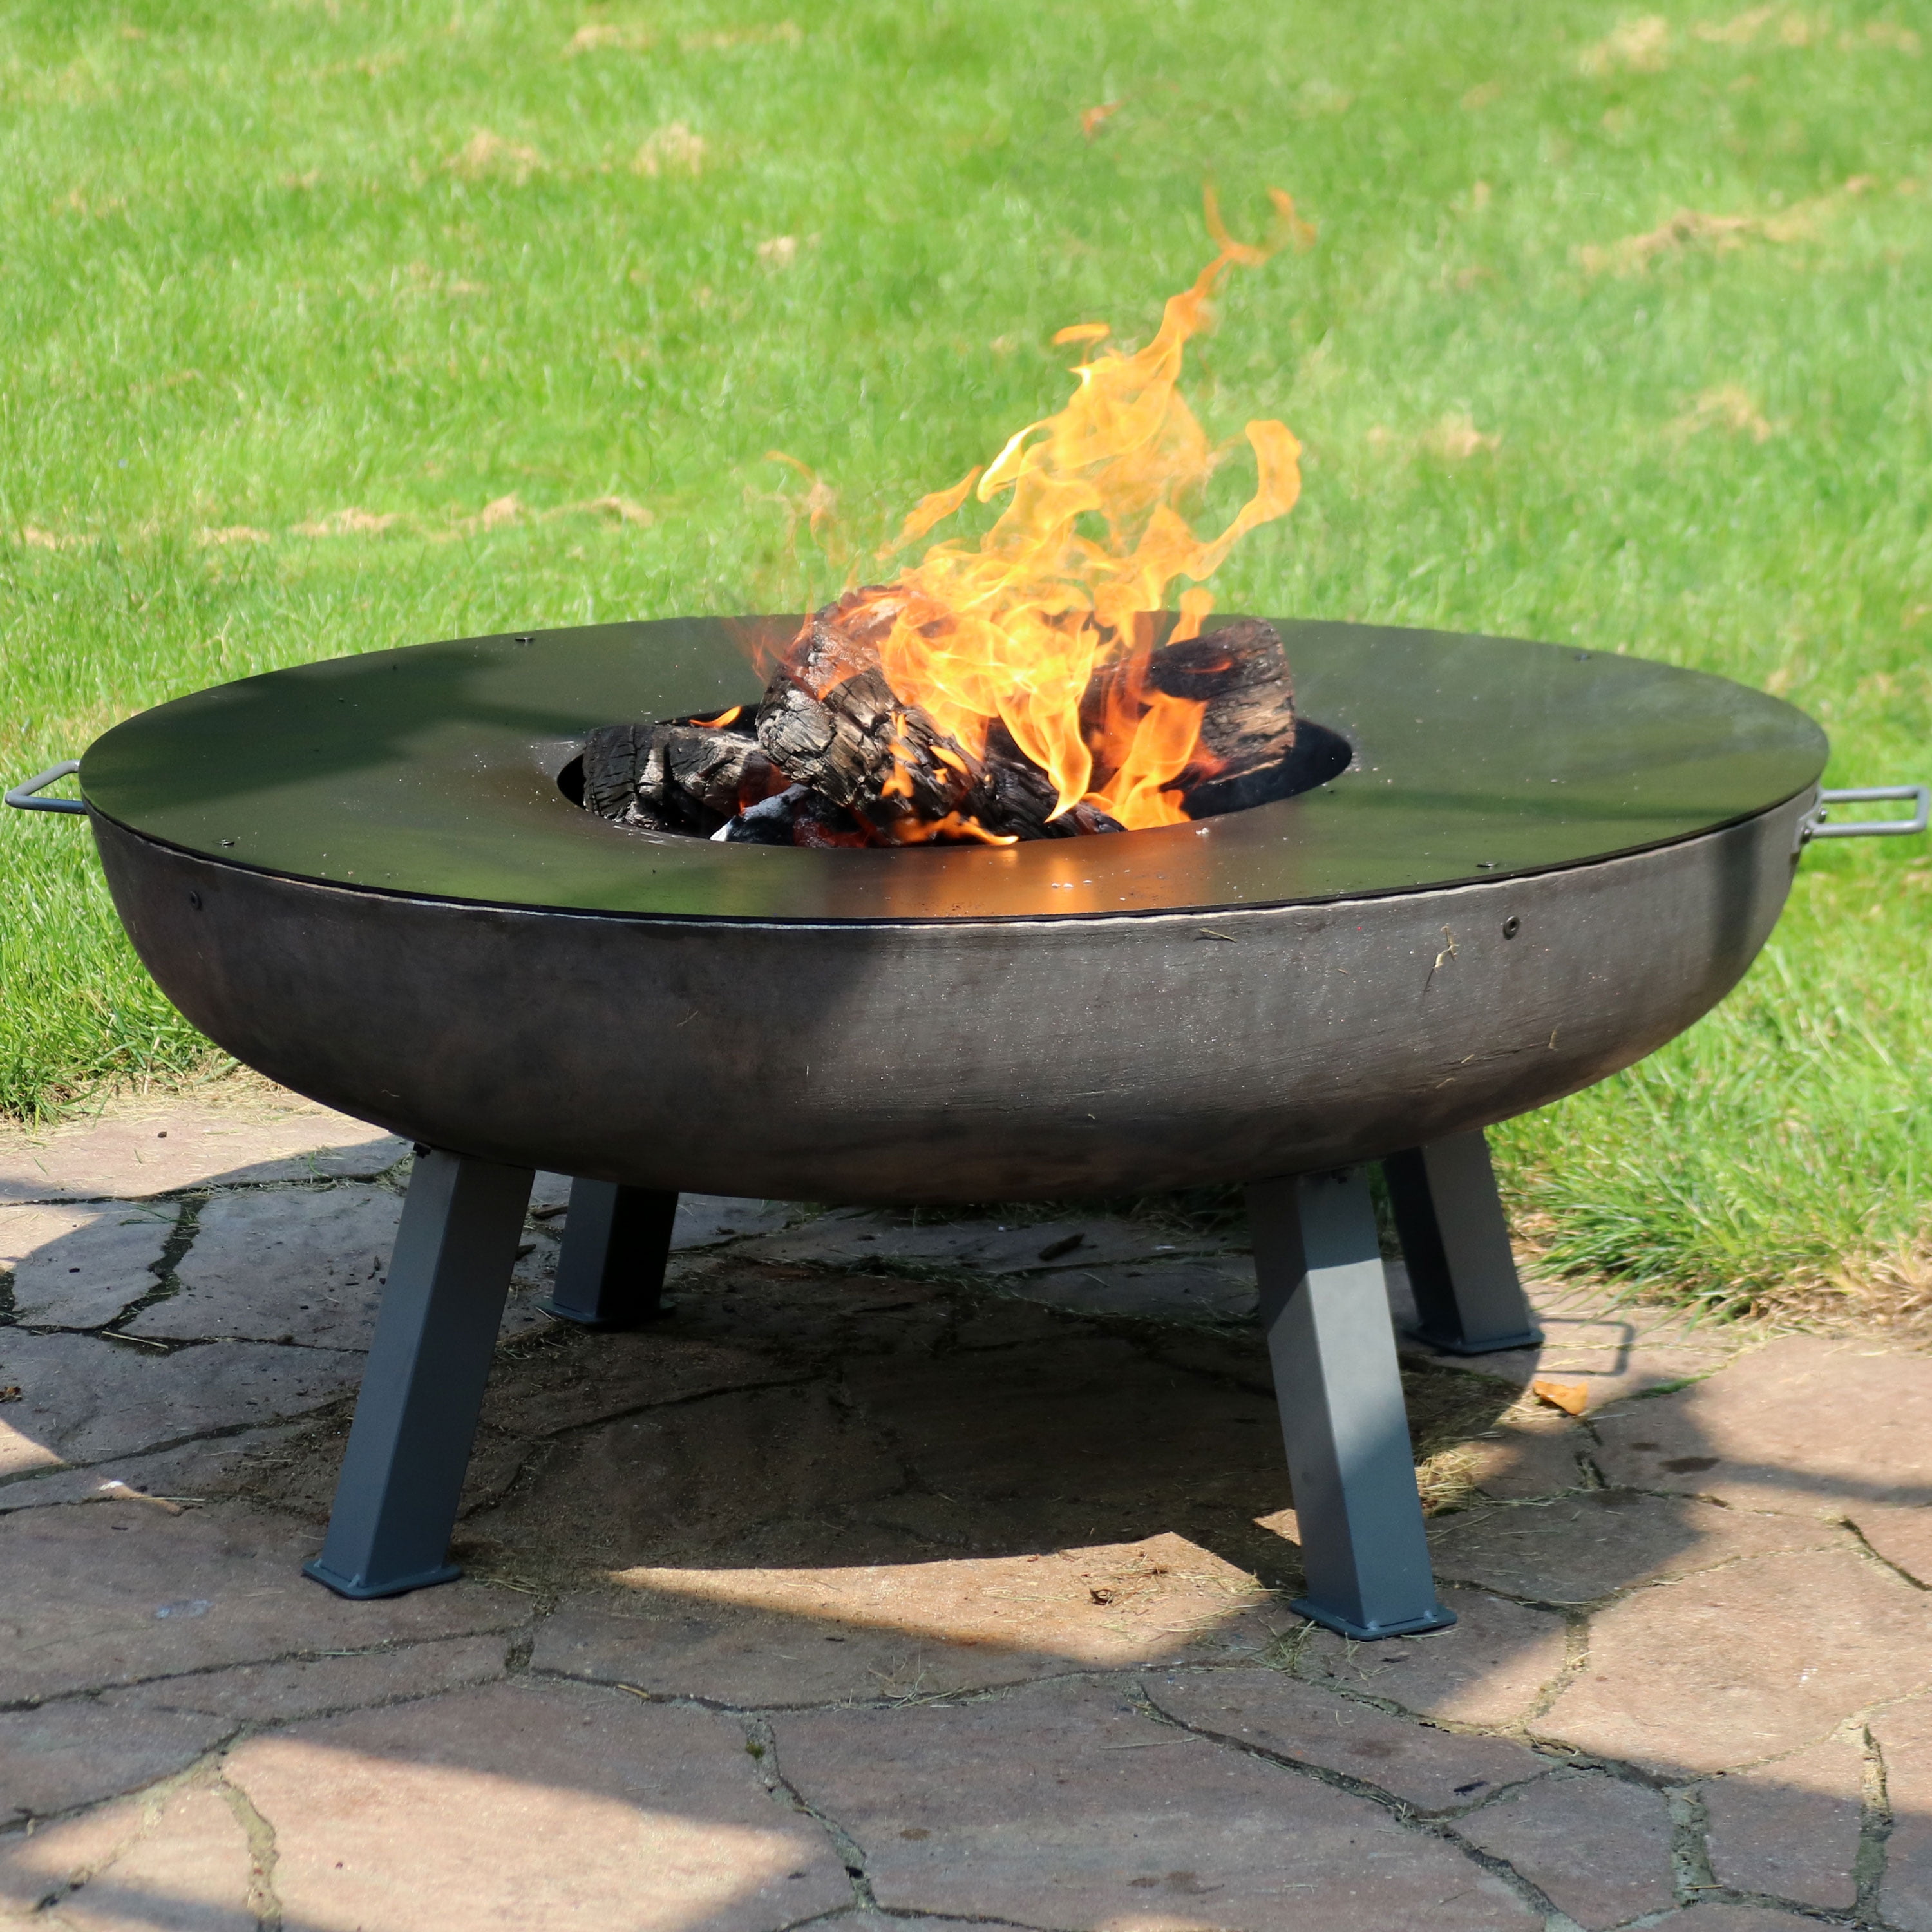 Sunnydaze Large Outdoor Fire Pit Bowl, Outdoor Fire Pit To Cook On